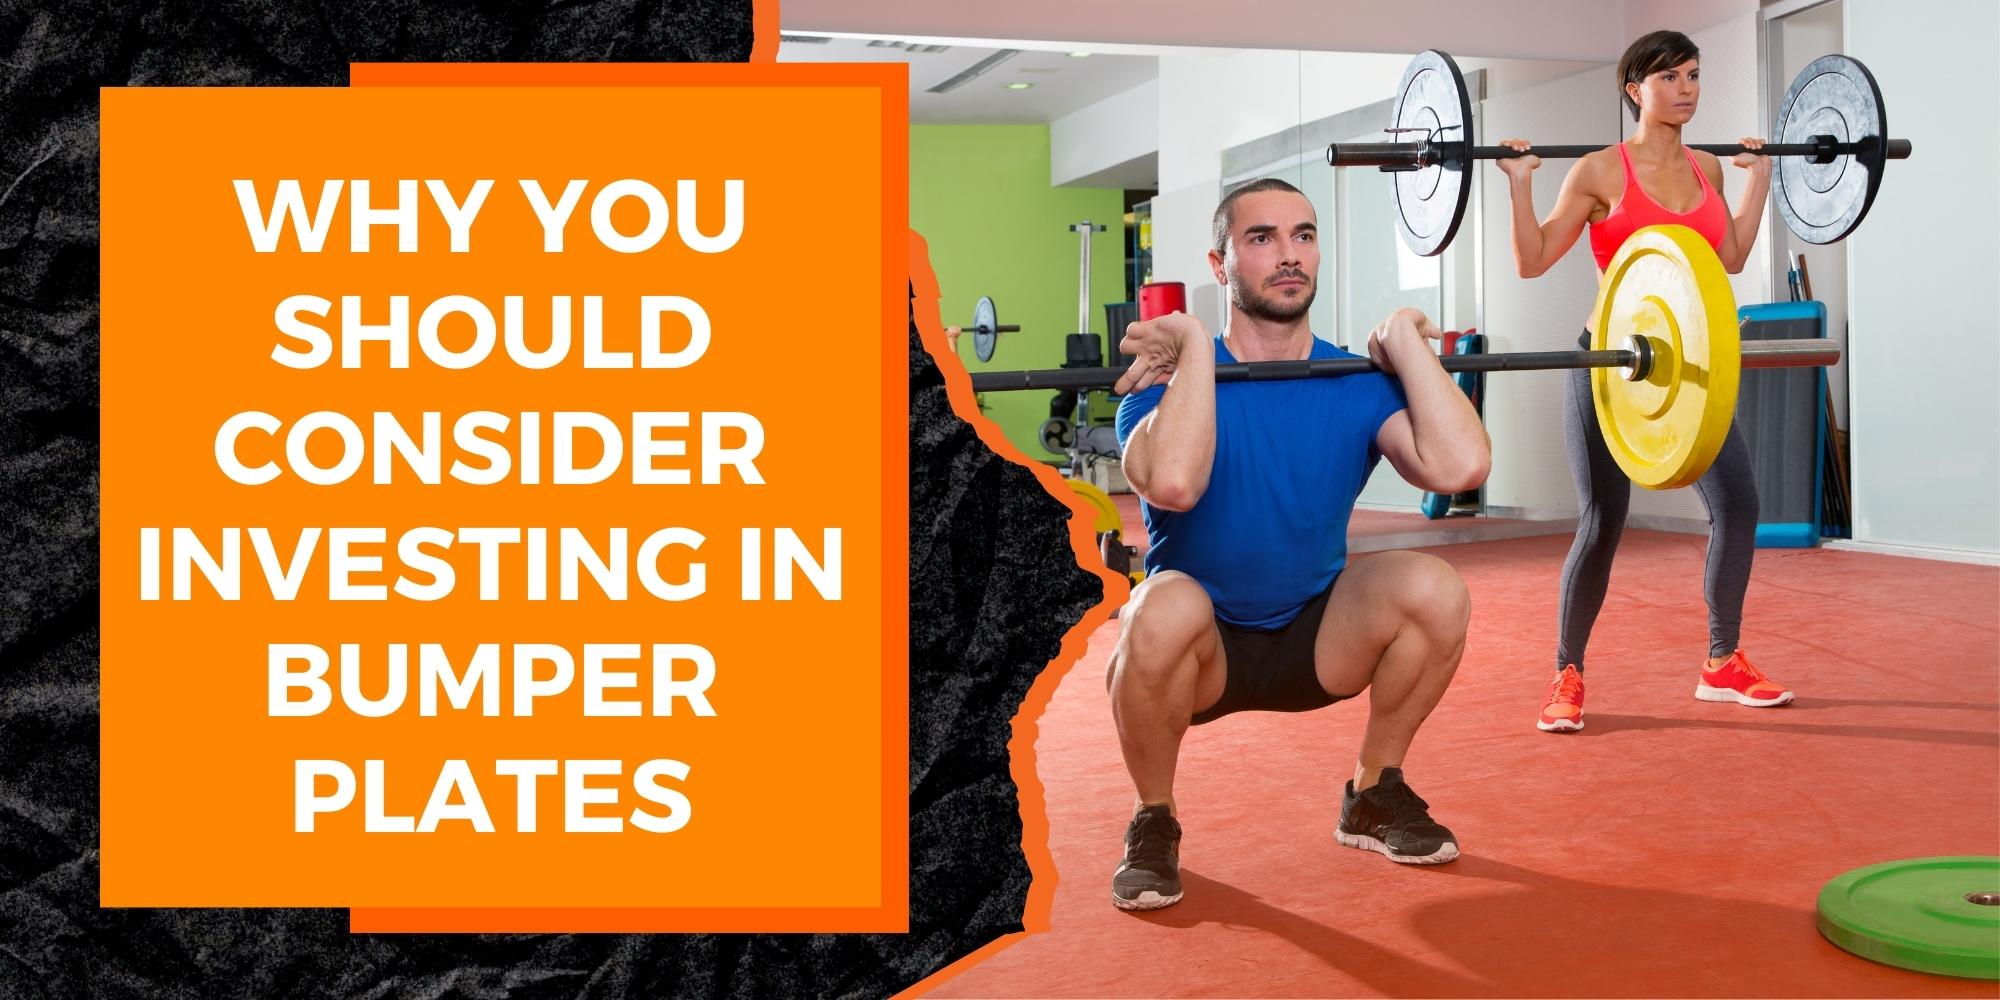 Why You Should Consider Investing in Bumper Plates